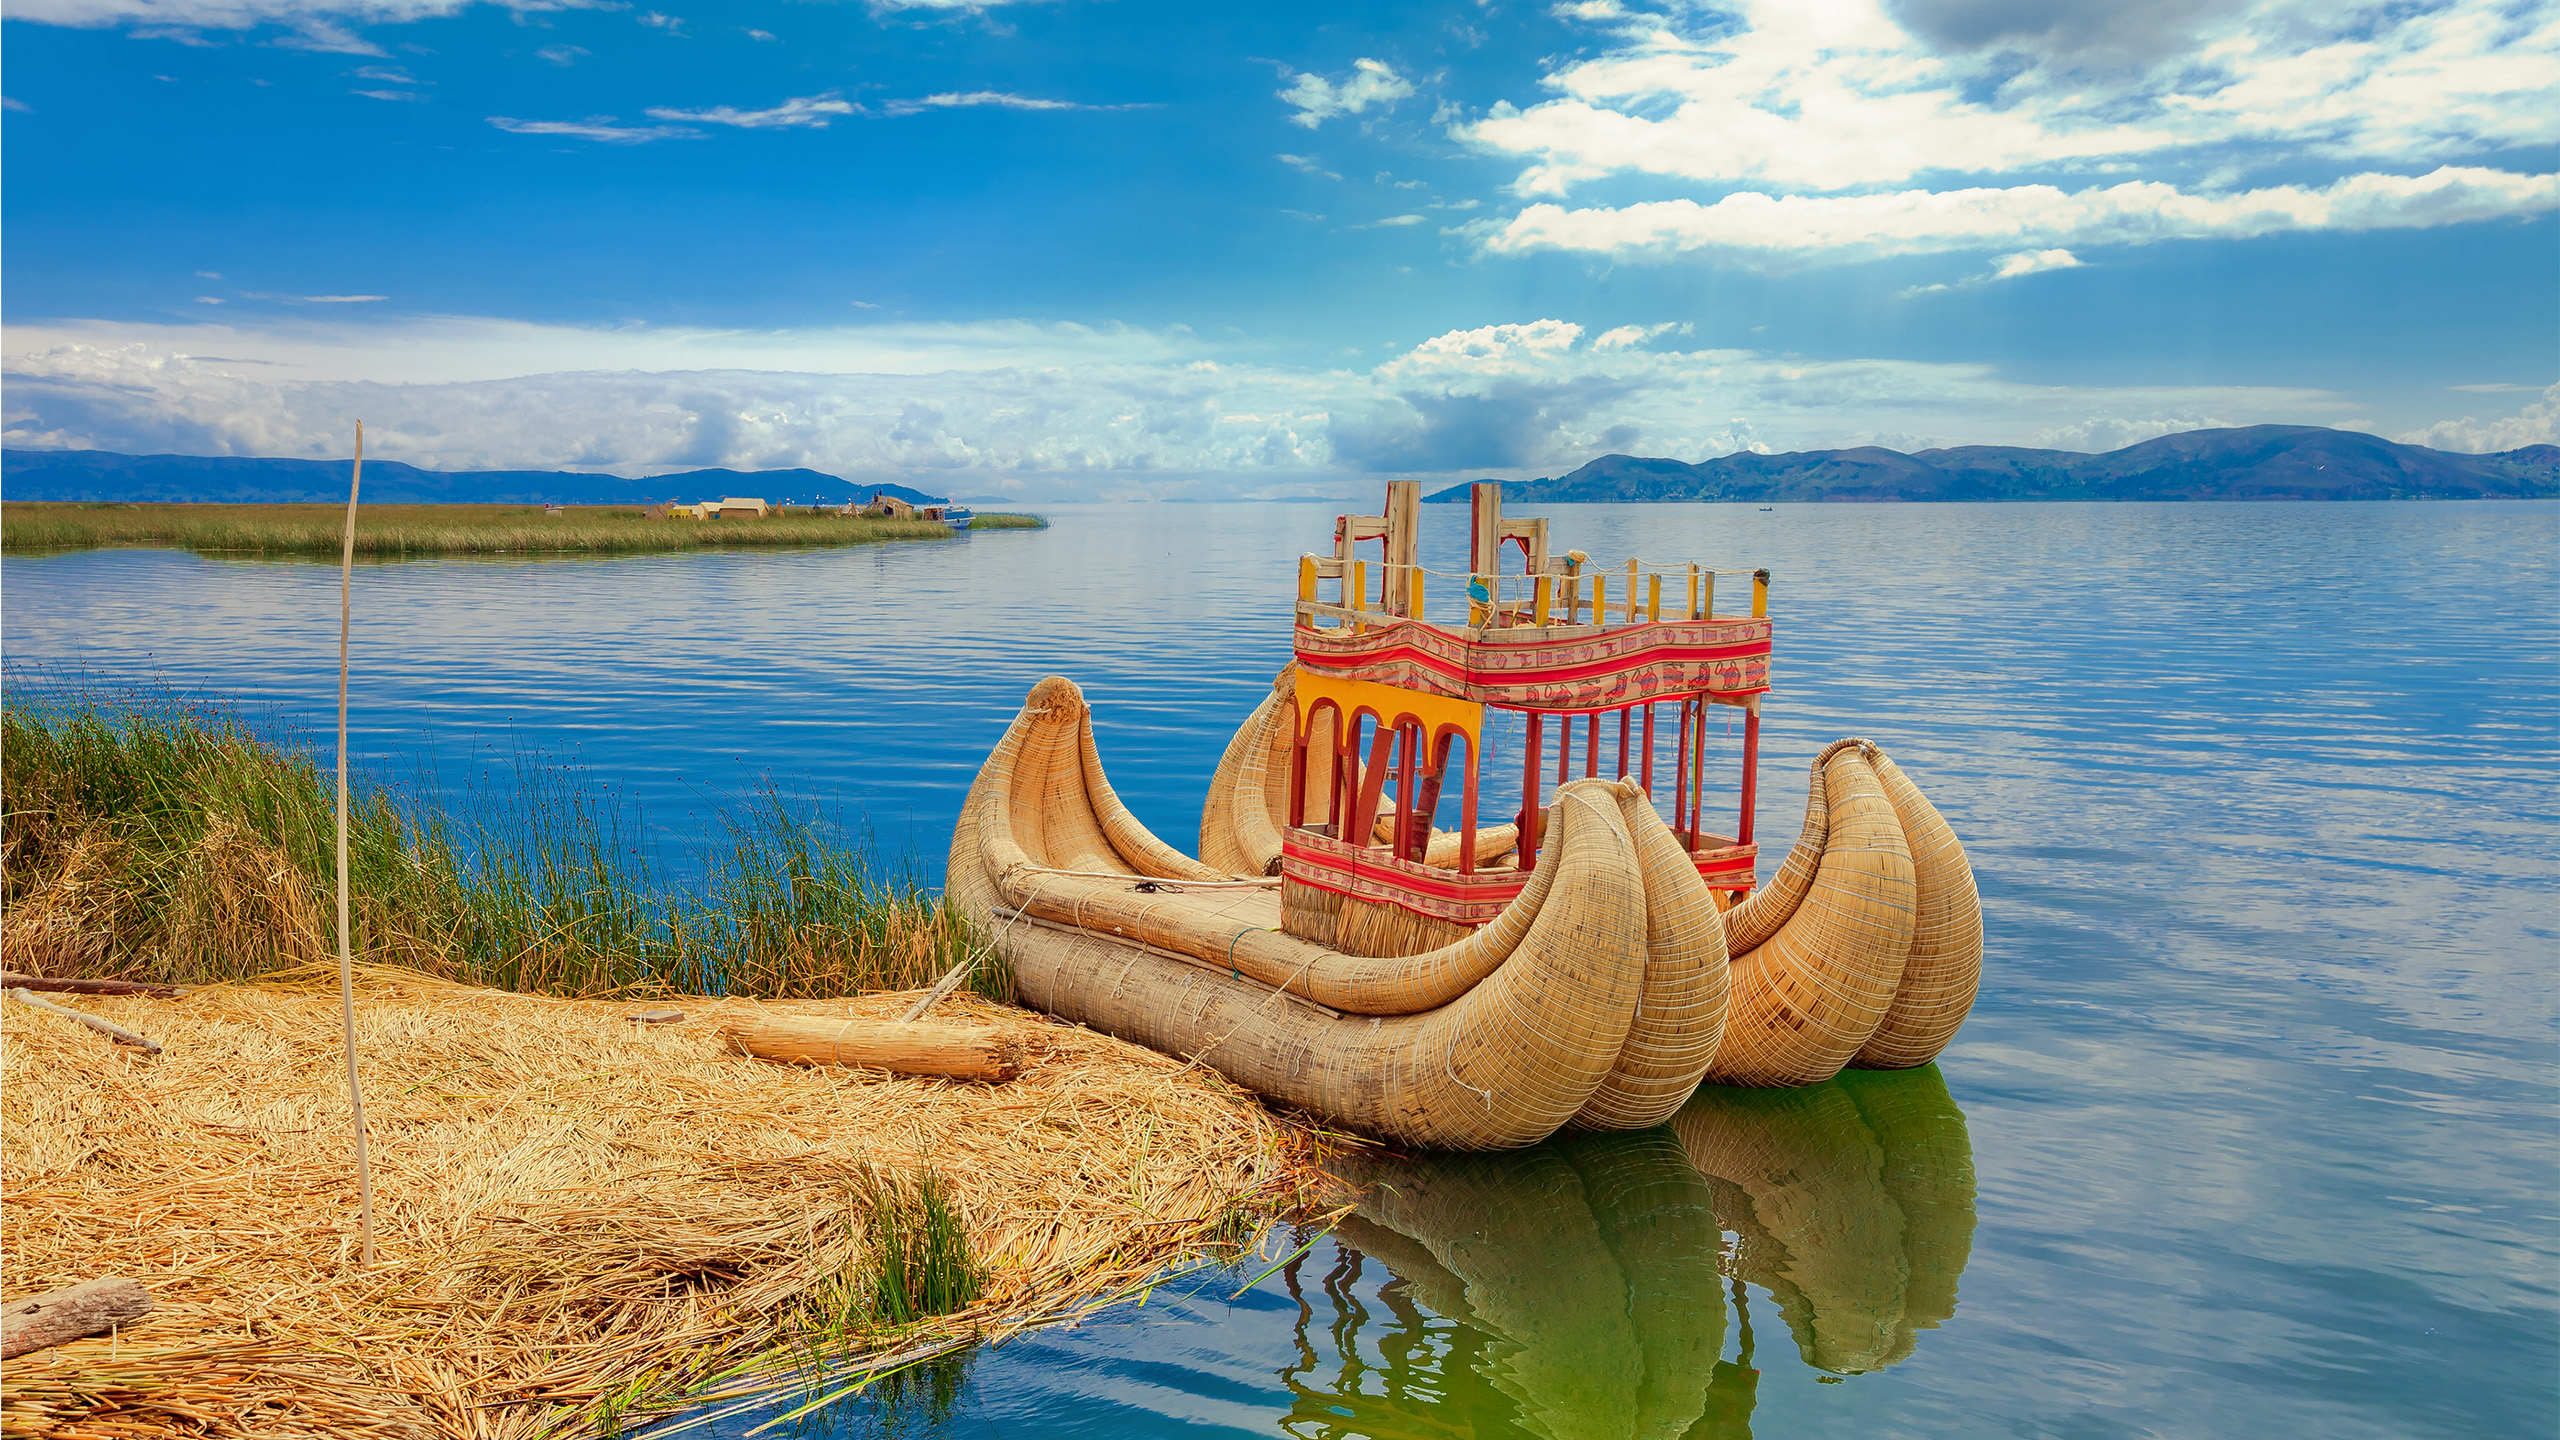 Traditional boats are made from the totora reed. | Milton Rodriguez, Shutterstock